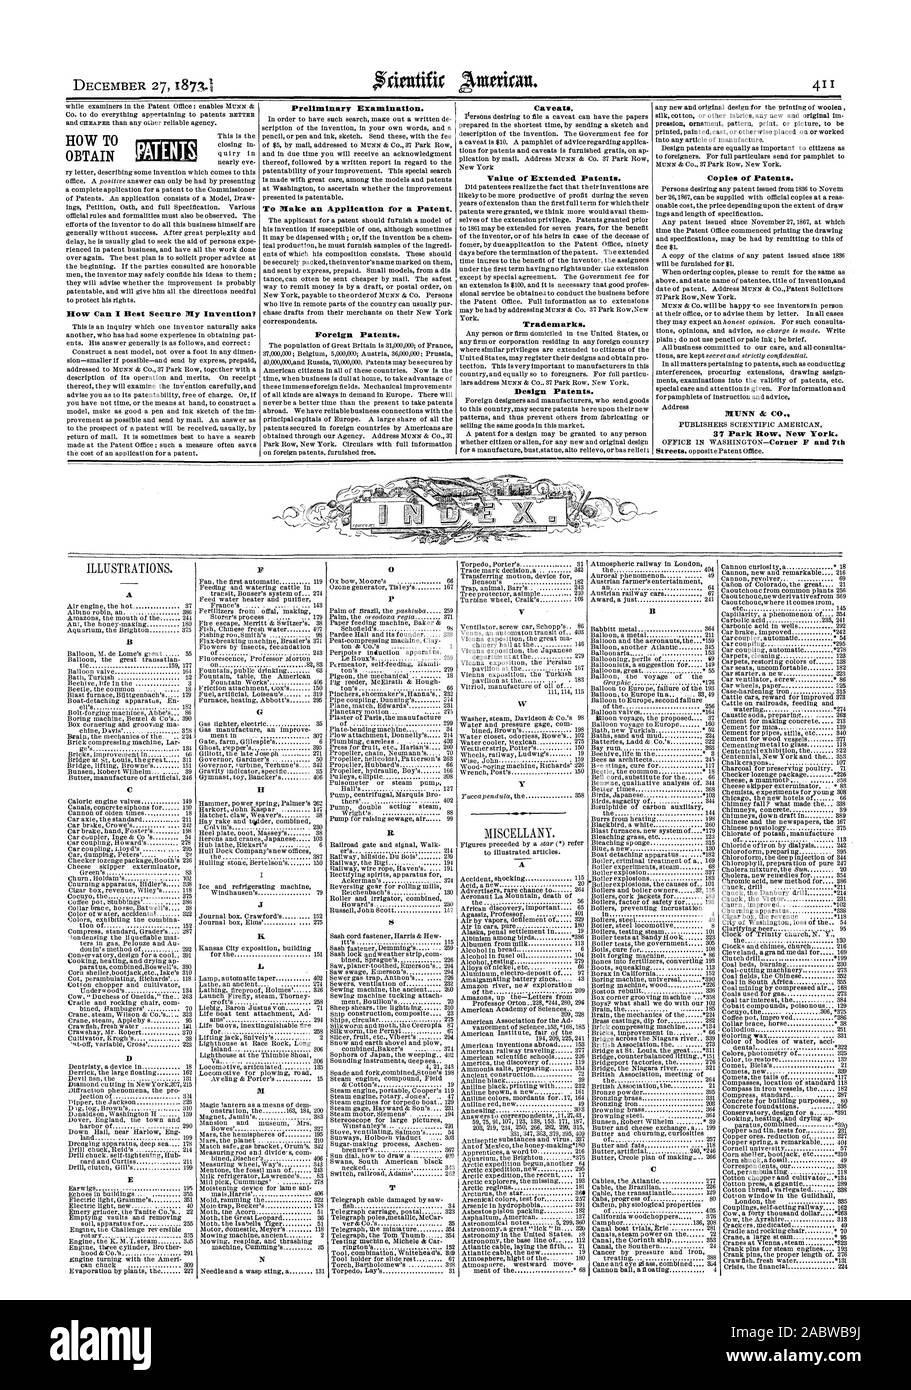 Caveats. Value of Extended Patents. Trademarks. Design Patents. Copies of Patents. MUNN & CO. 37 Park Row New York. Mow Can I Best Secure My Invention? Preliminary Examination. To Make an Application for a Patent. Foreign Patents. HOW T OBTAIN PATENT B, scientific american, 1873-12-27 Stock Photo